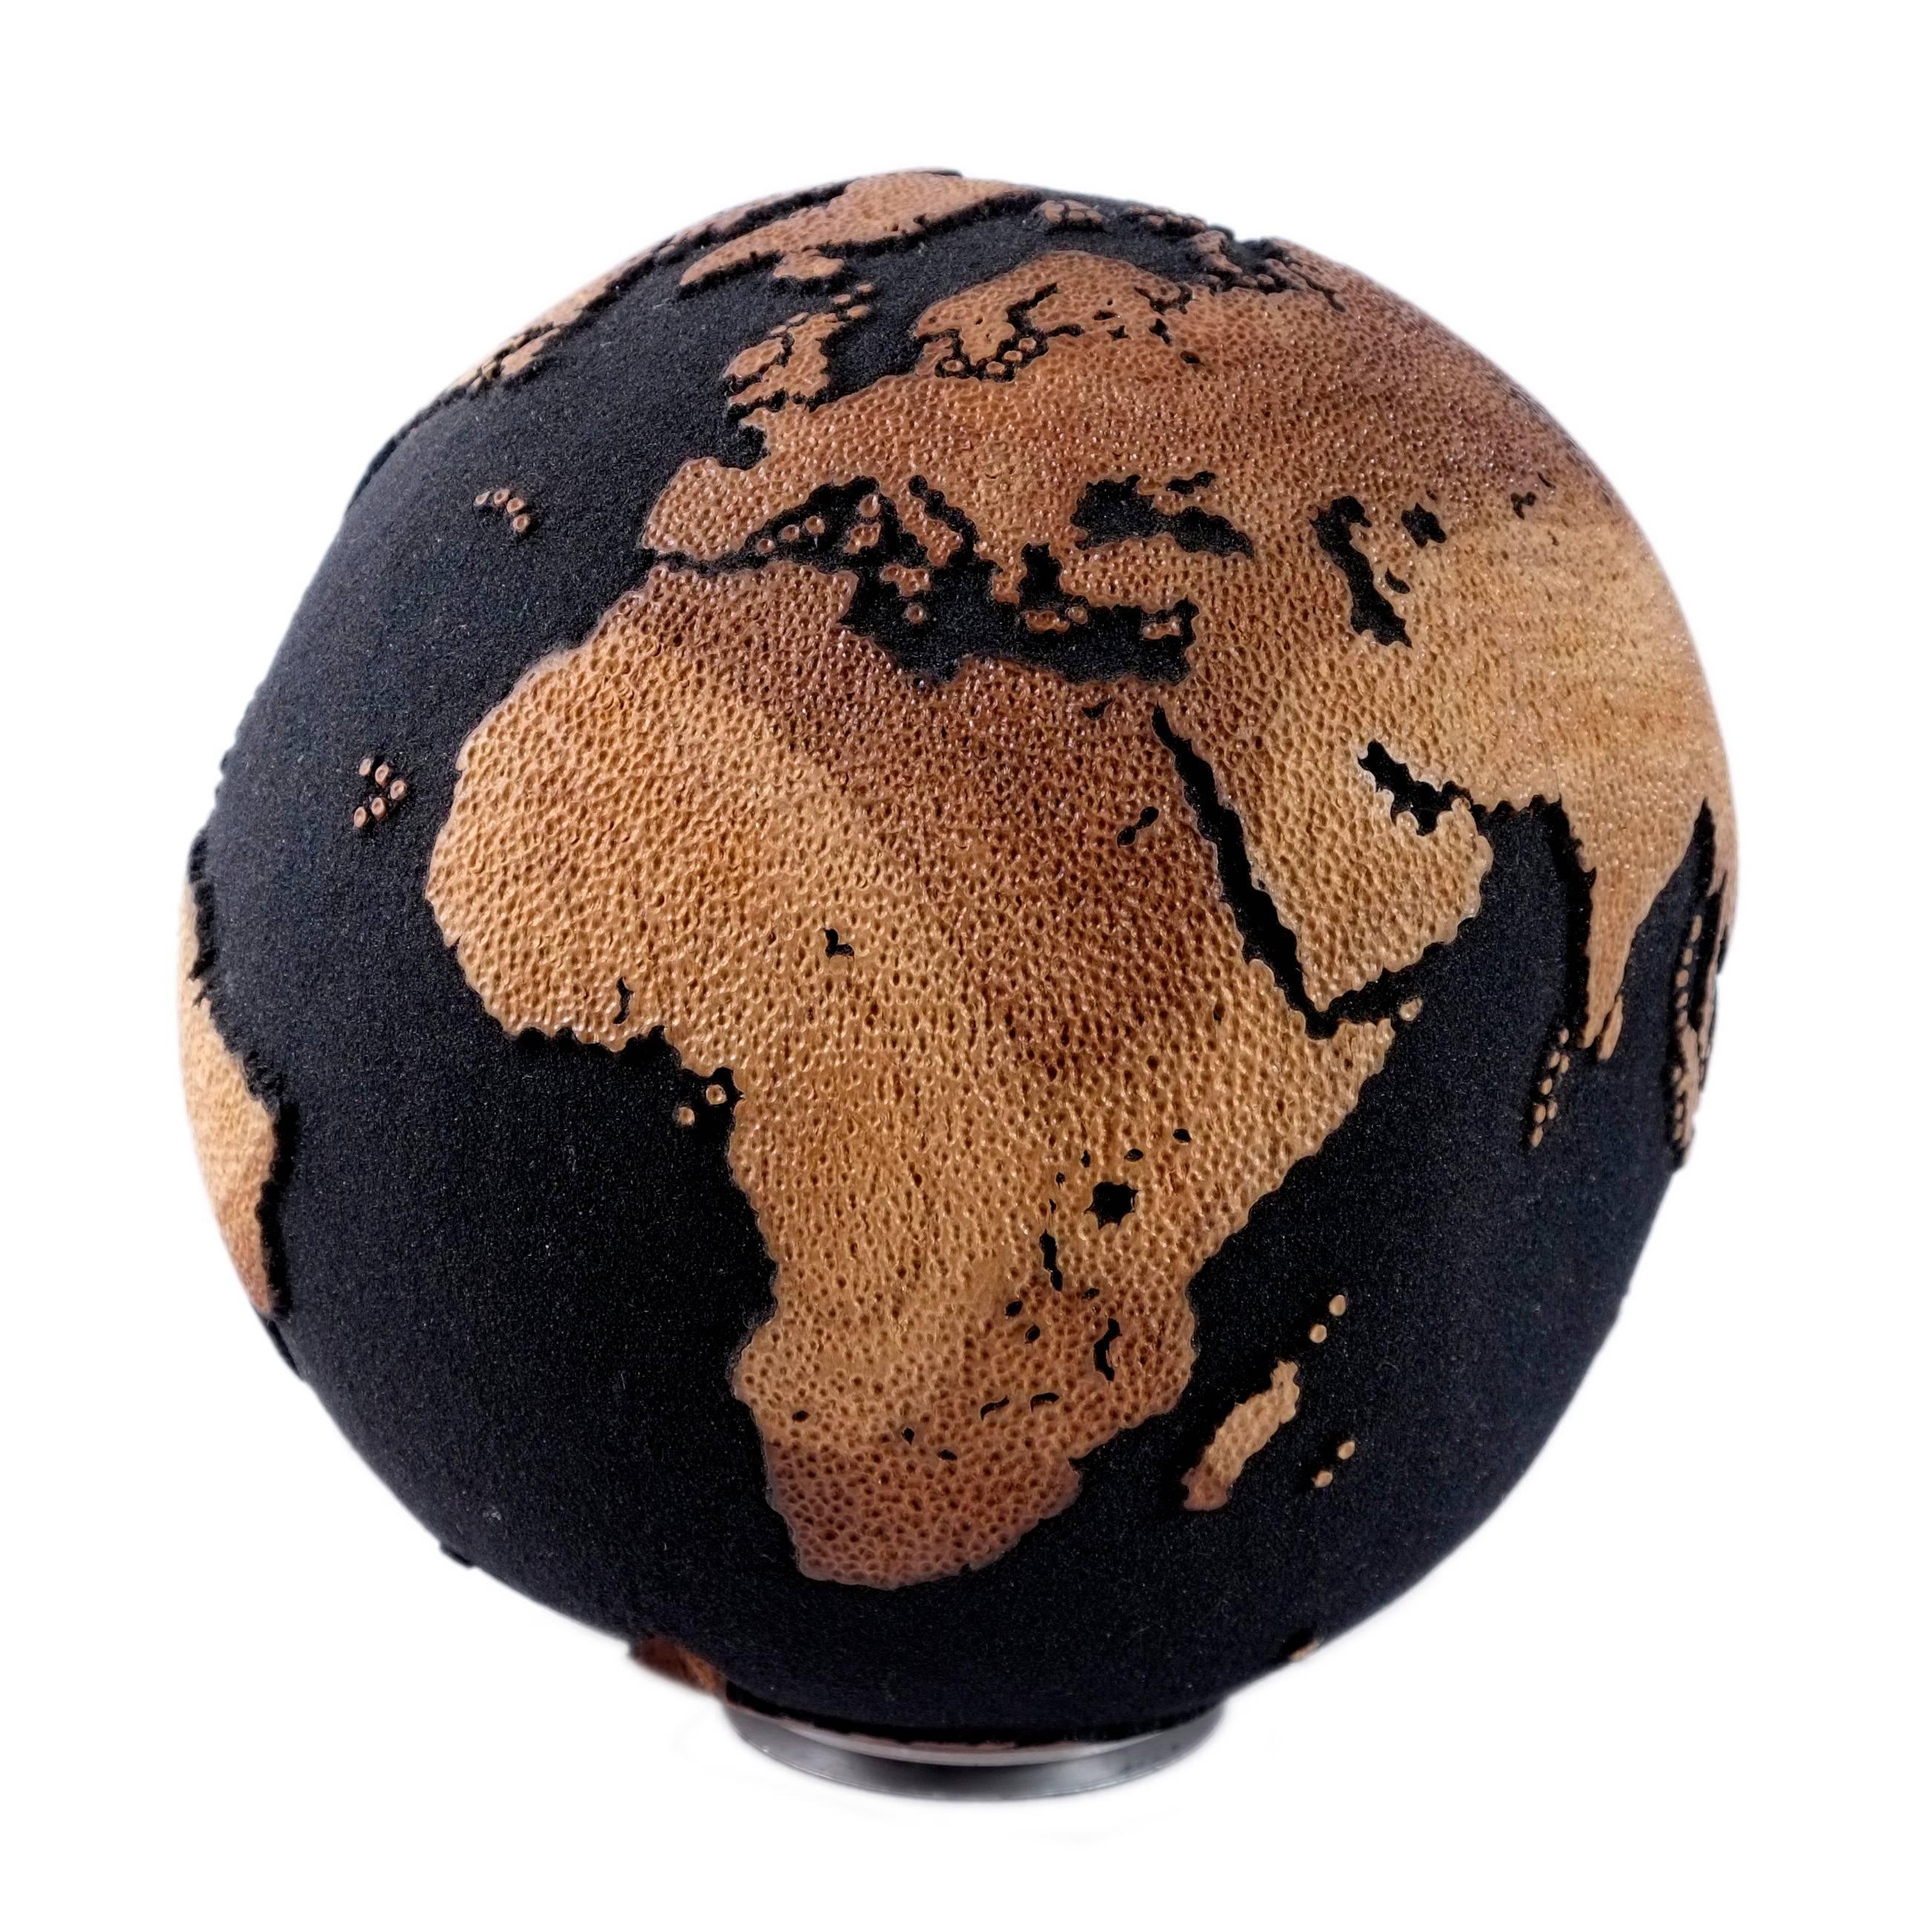 Artistic creativity is a whirlpool of imagination that swirls in the depths of the mind.

Elegant hand carved wooden globe made of teak root with hammered skin texture on the continents, and volcanic sand finishing. A perfect addition to your space